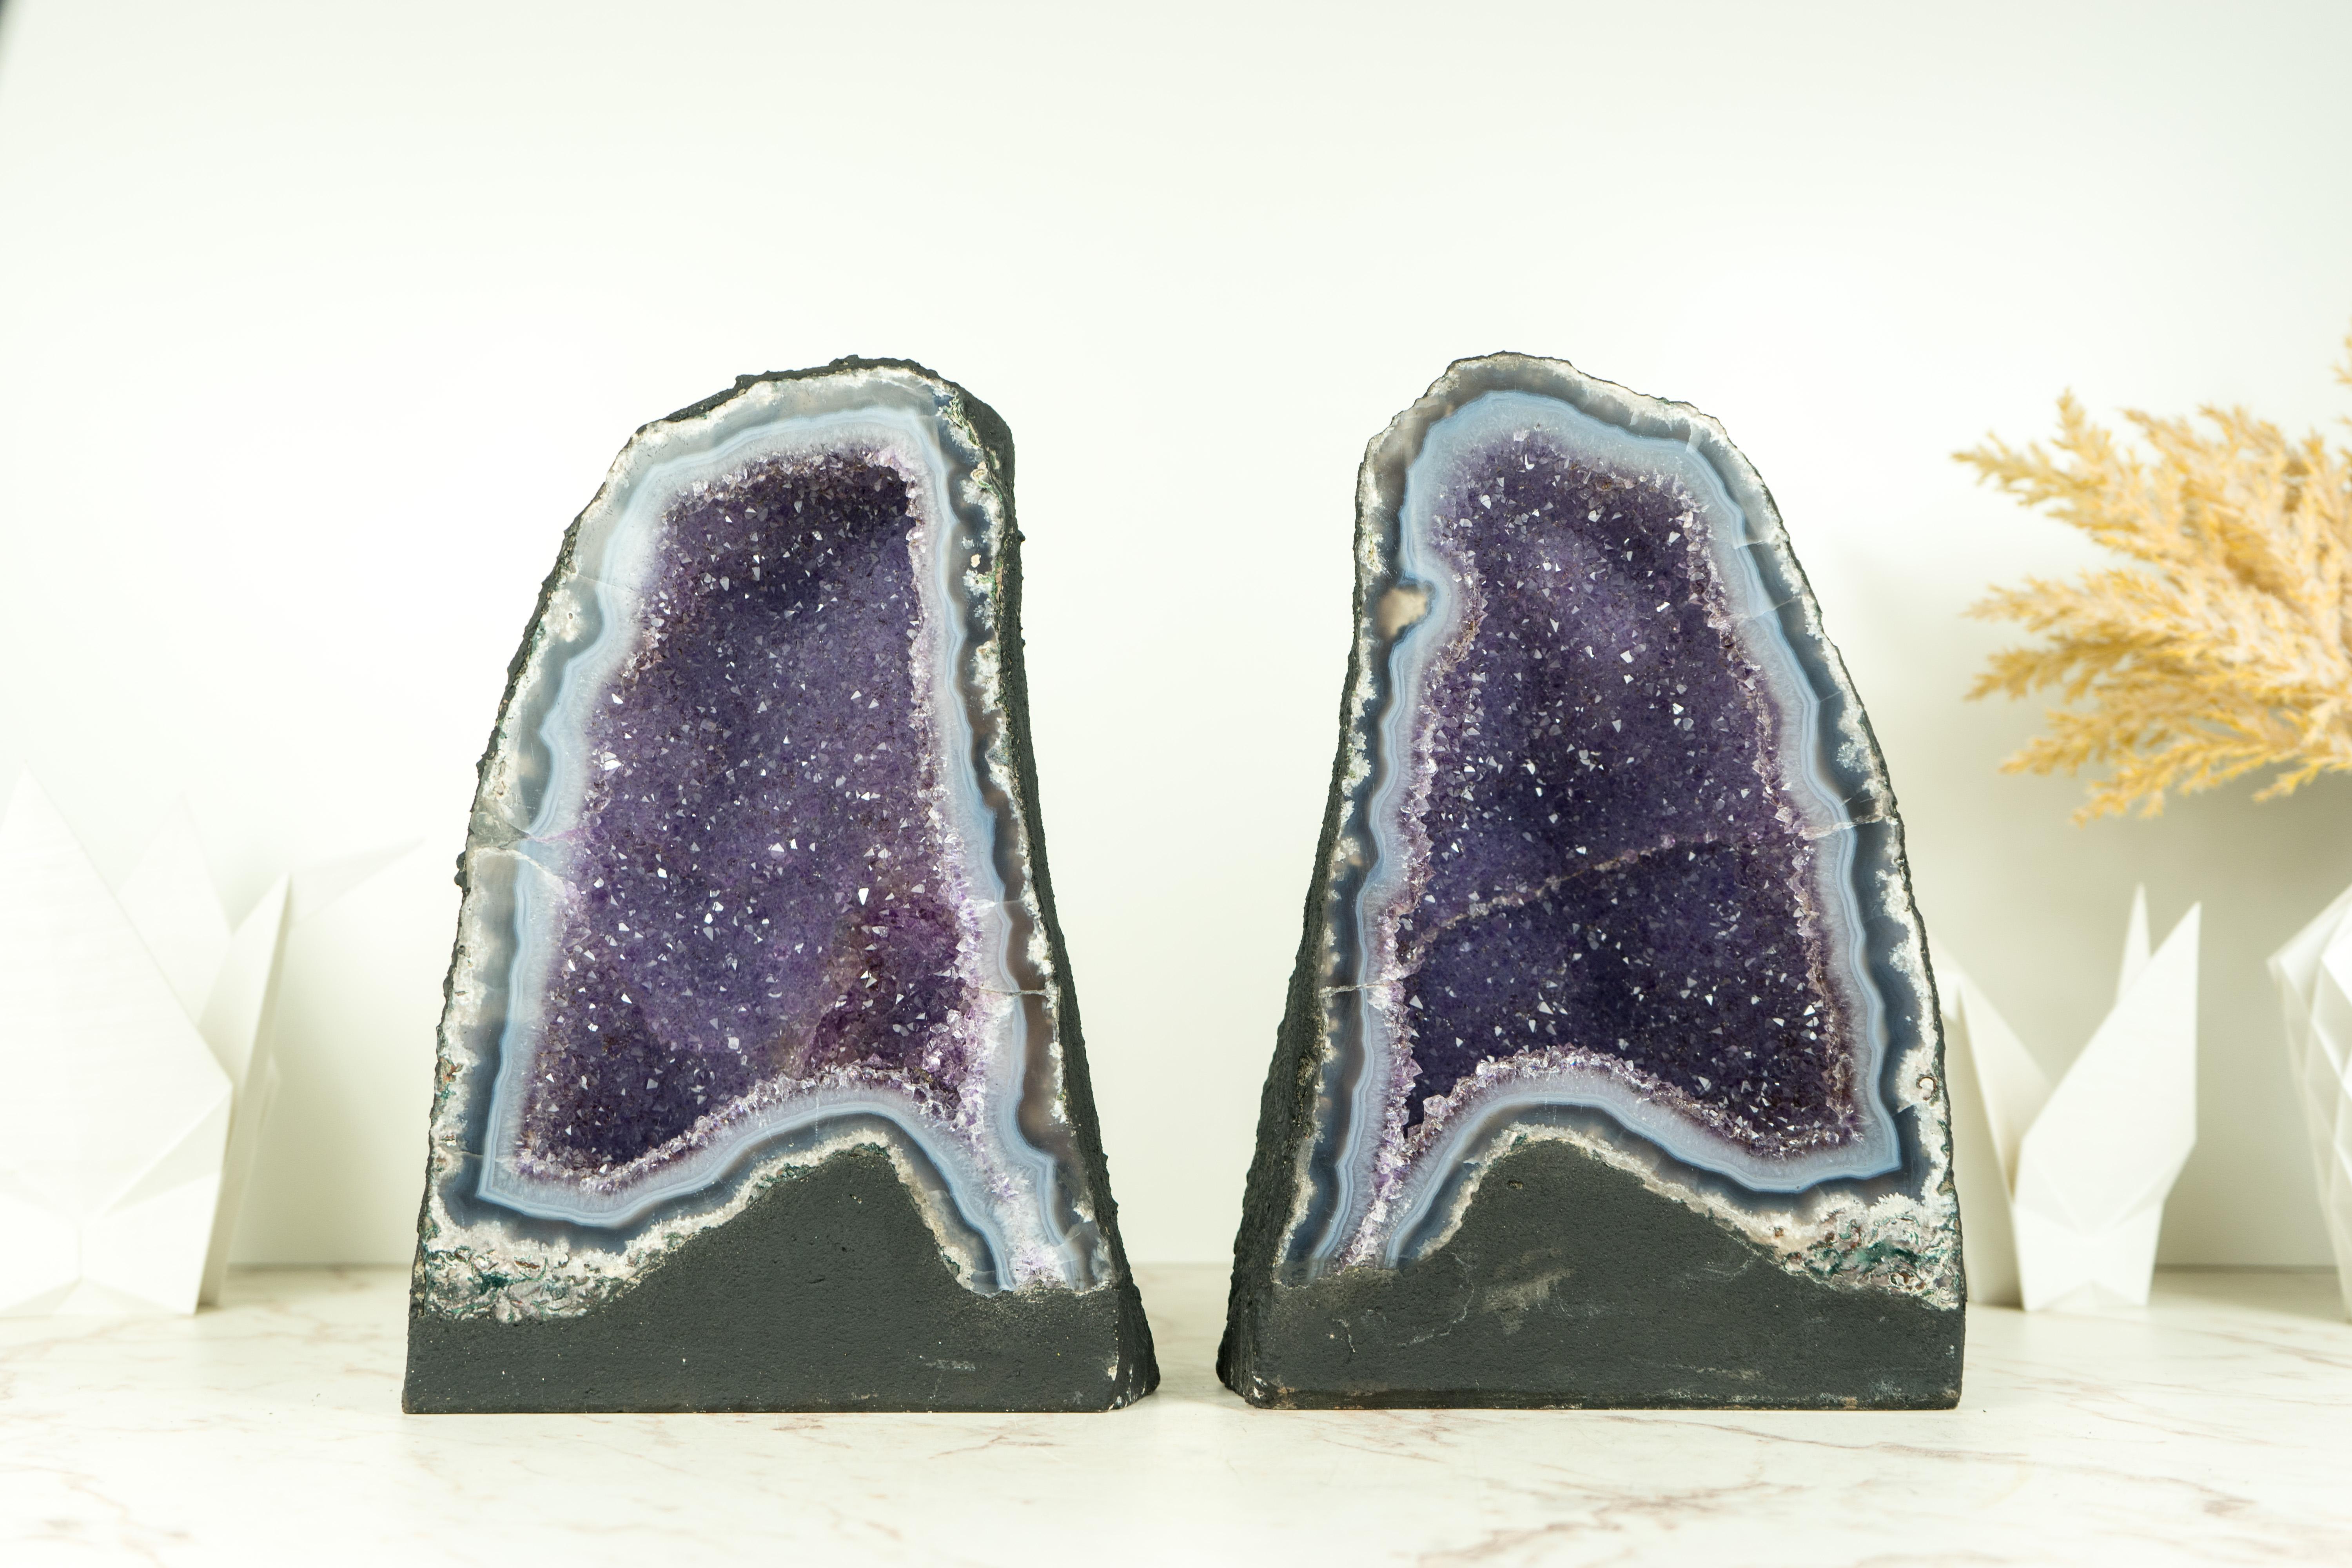 Pair of High-Grade Small Blue Lace Agate Geodes with Sparkly Lavender Amethyst For Sale 6